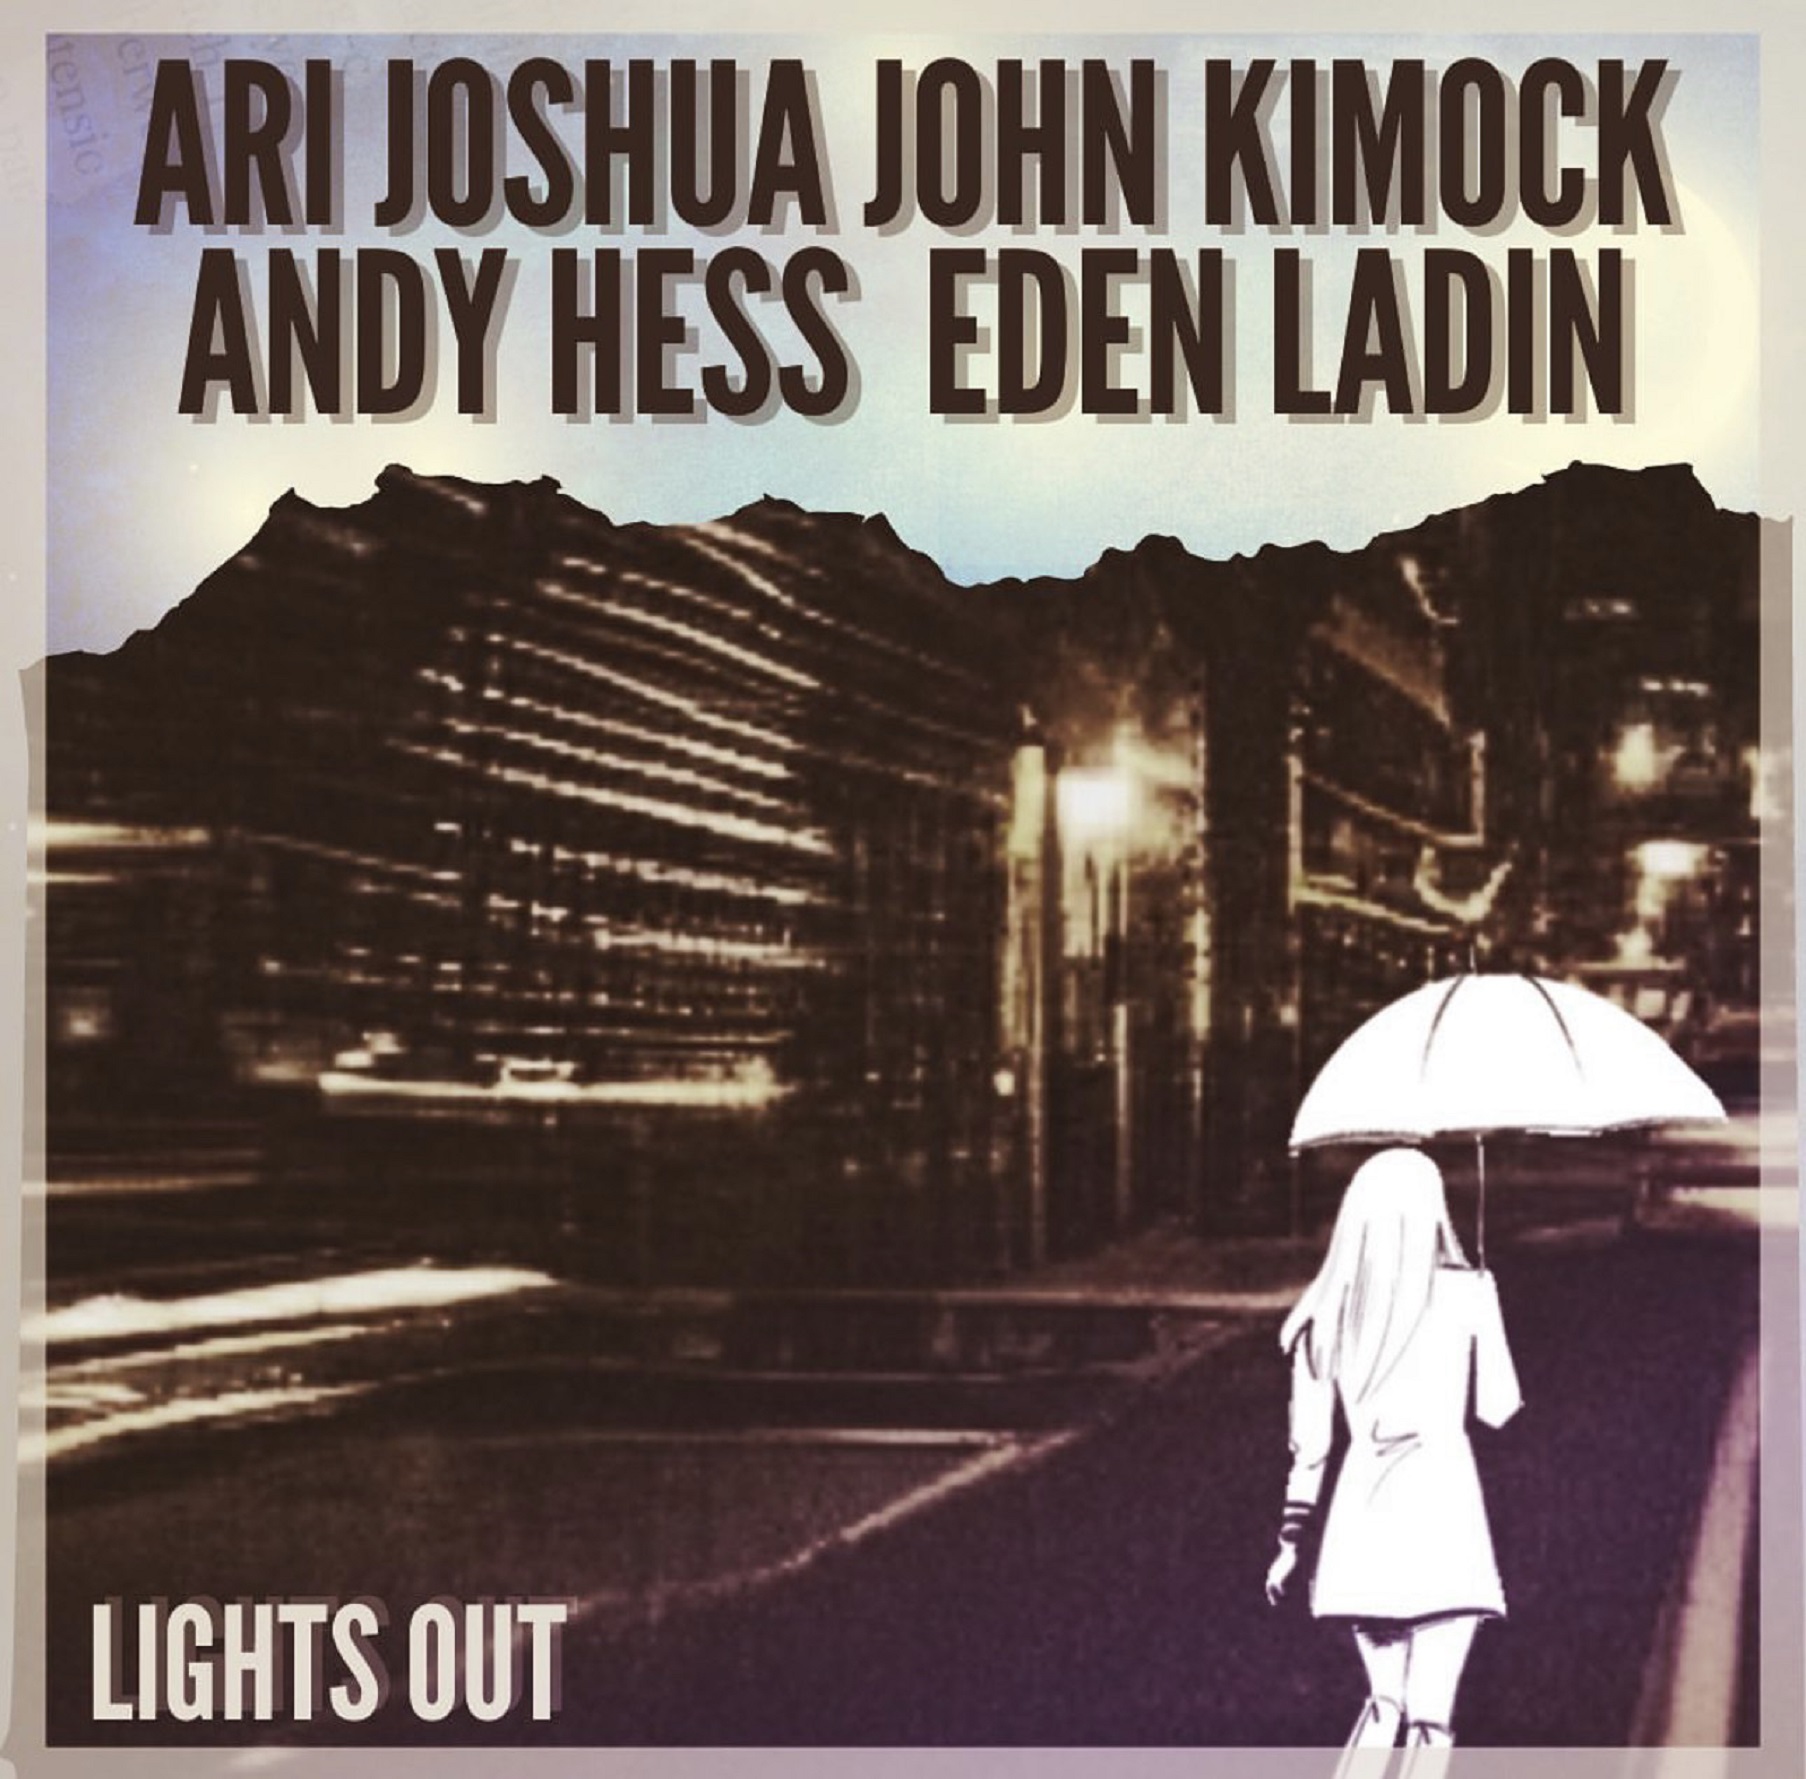 “Lights Out” featuring Ari Joshua, John Kimock, Eden Ladin, & Andy Hess Out April 14th, 2023